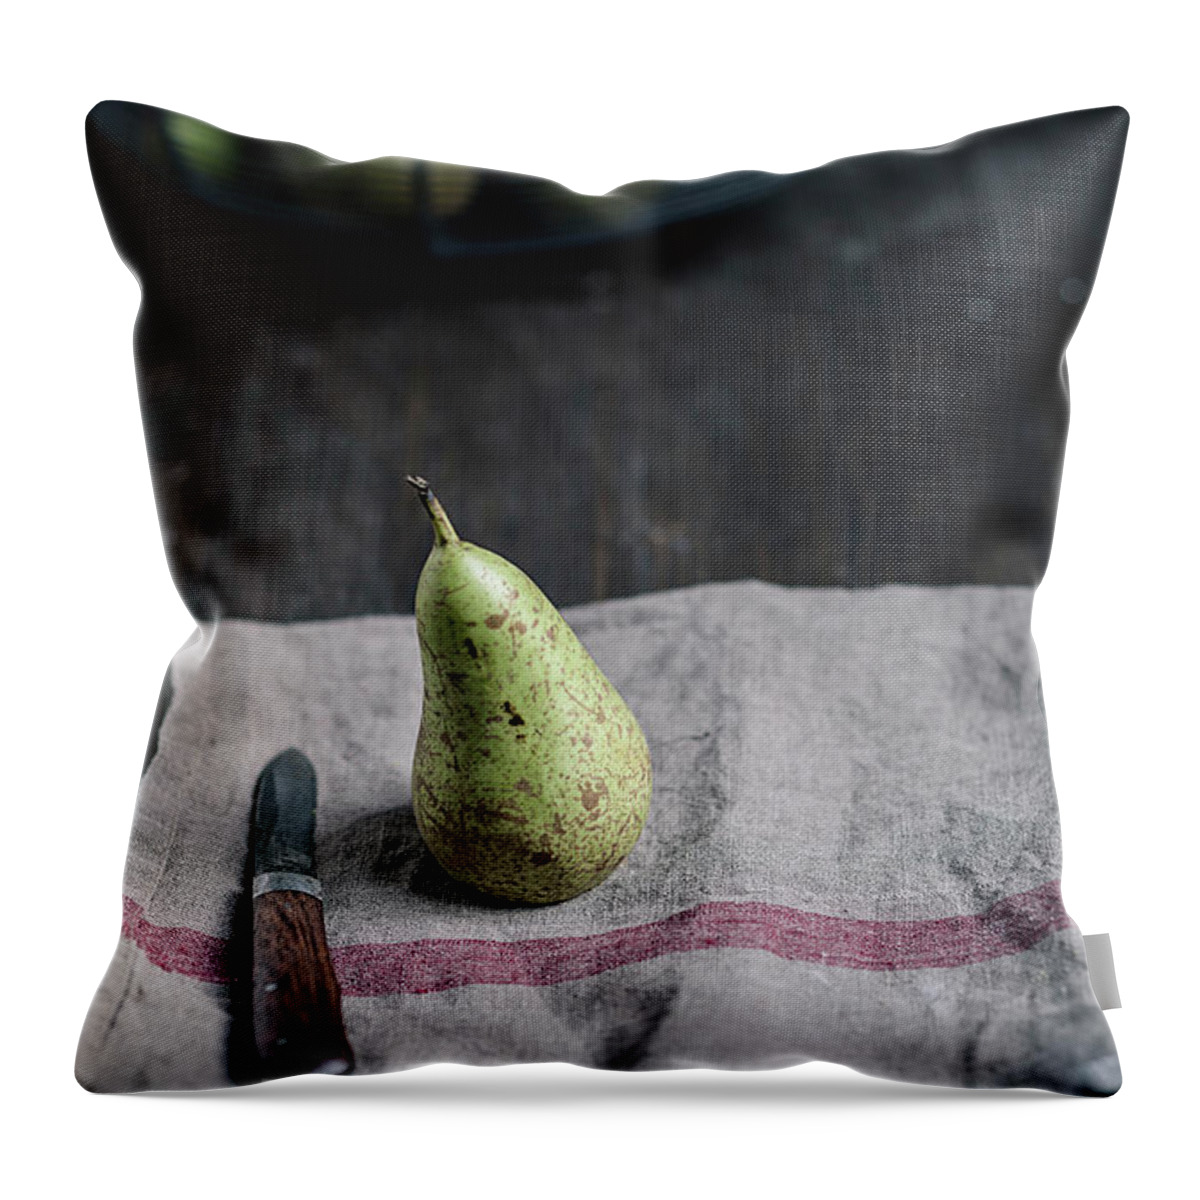 Dish Towel Throw Pillow featuring the photograph Pear With Water Trops And Knife On #1 by Westend61